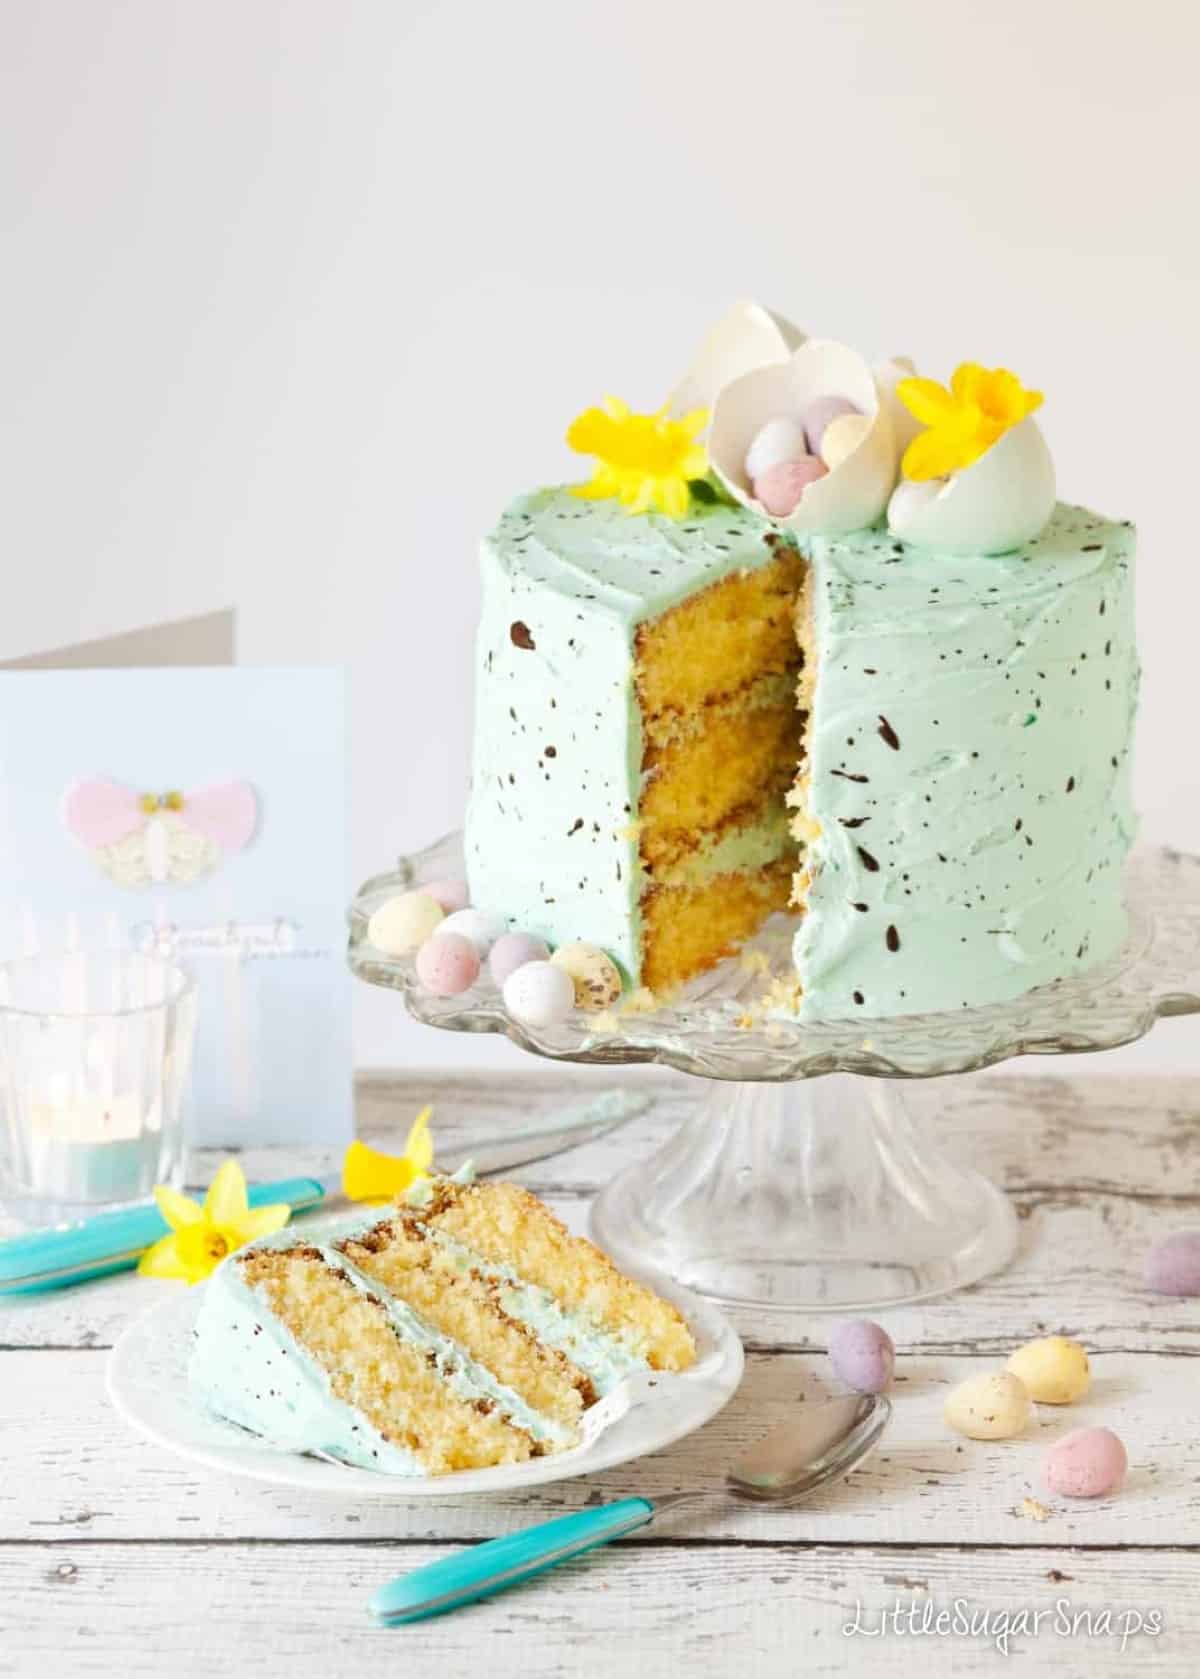 Speckled egg cake with a slice taken and put onto a plate.